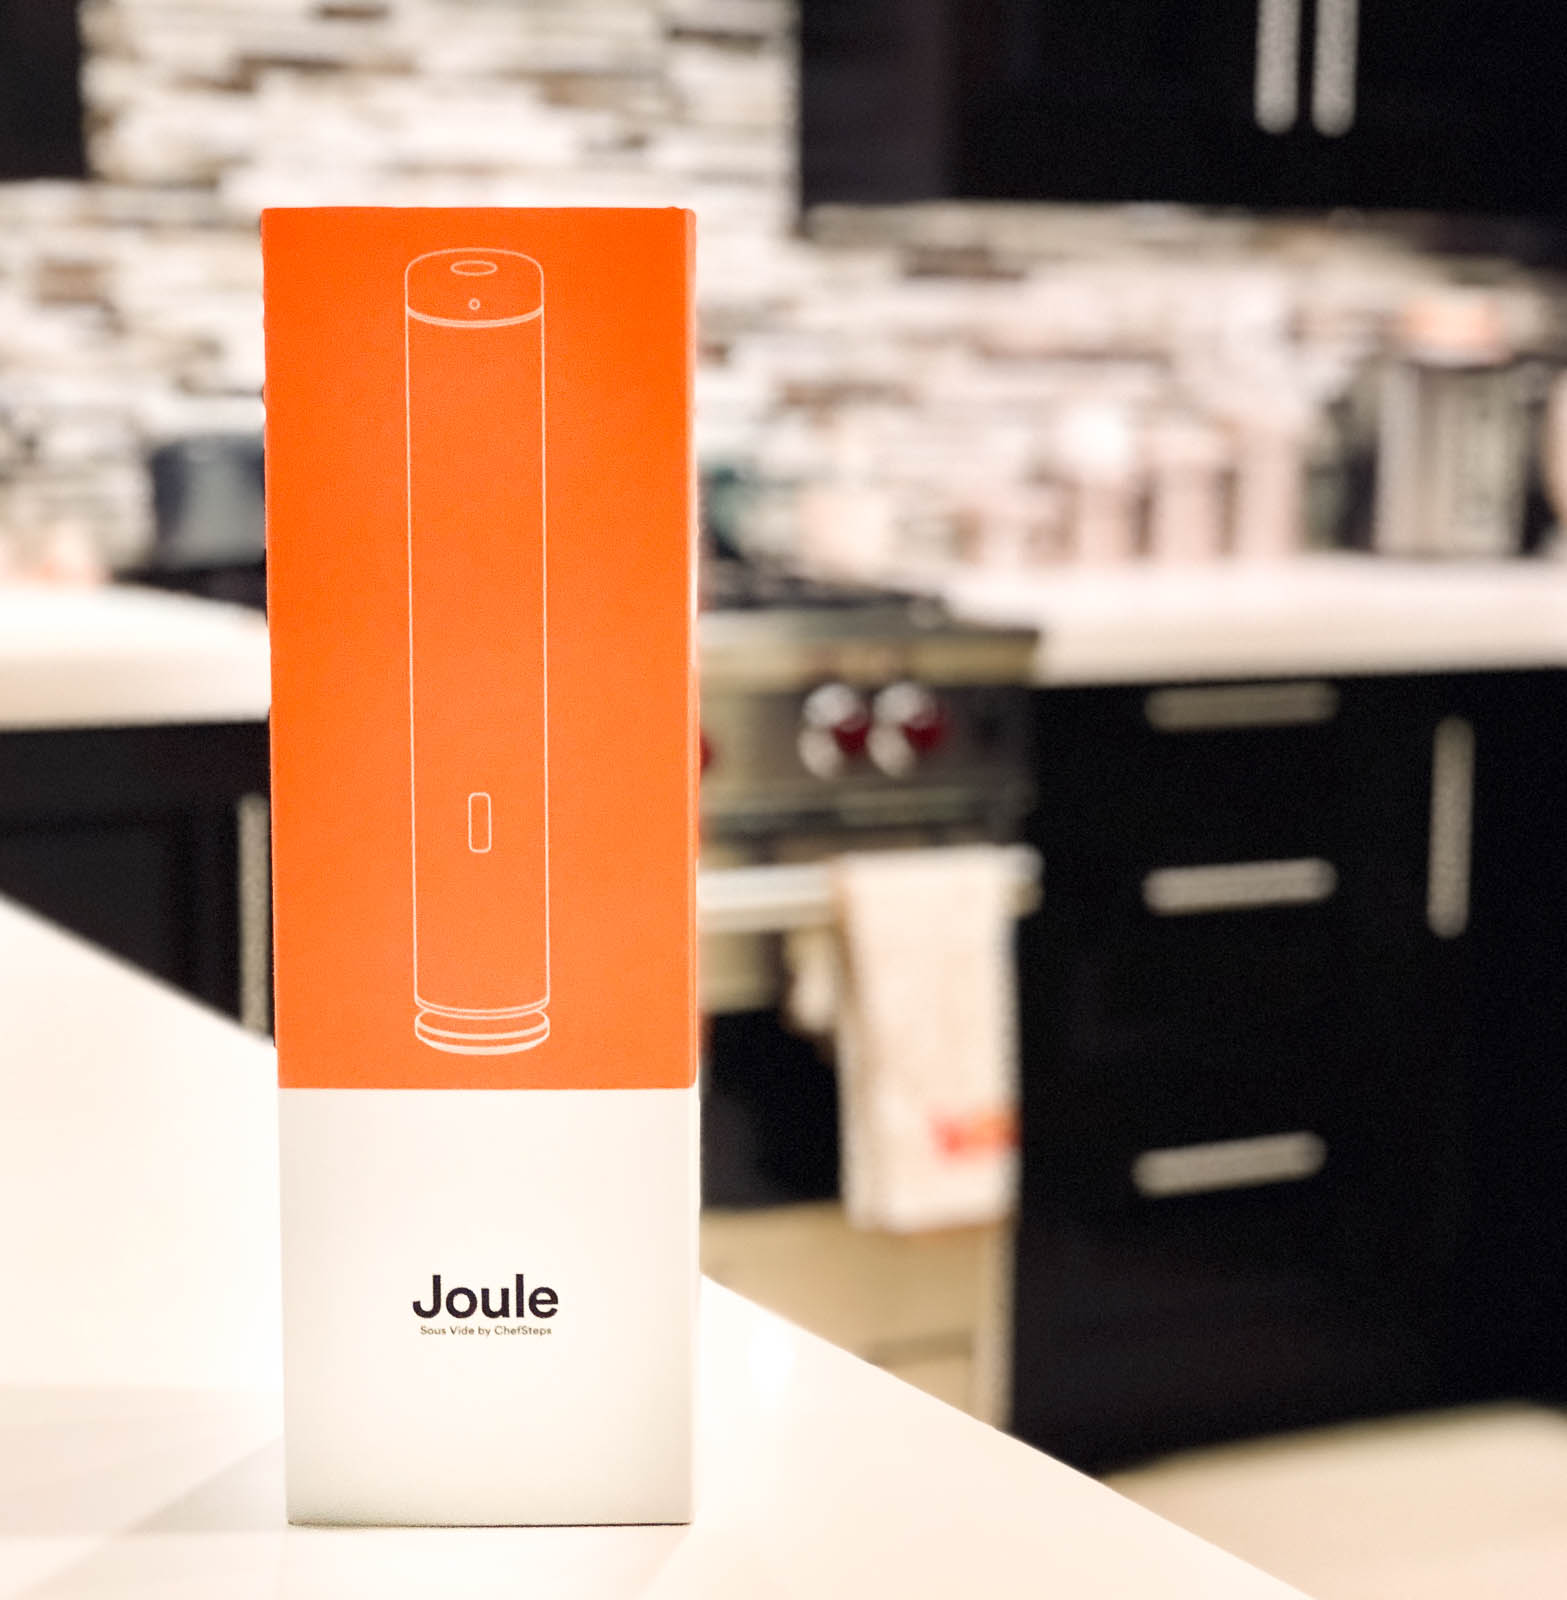 ChefSteps' Joule Is a Smarter Immersion Wand for Sous Vide